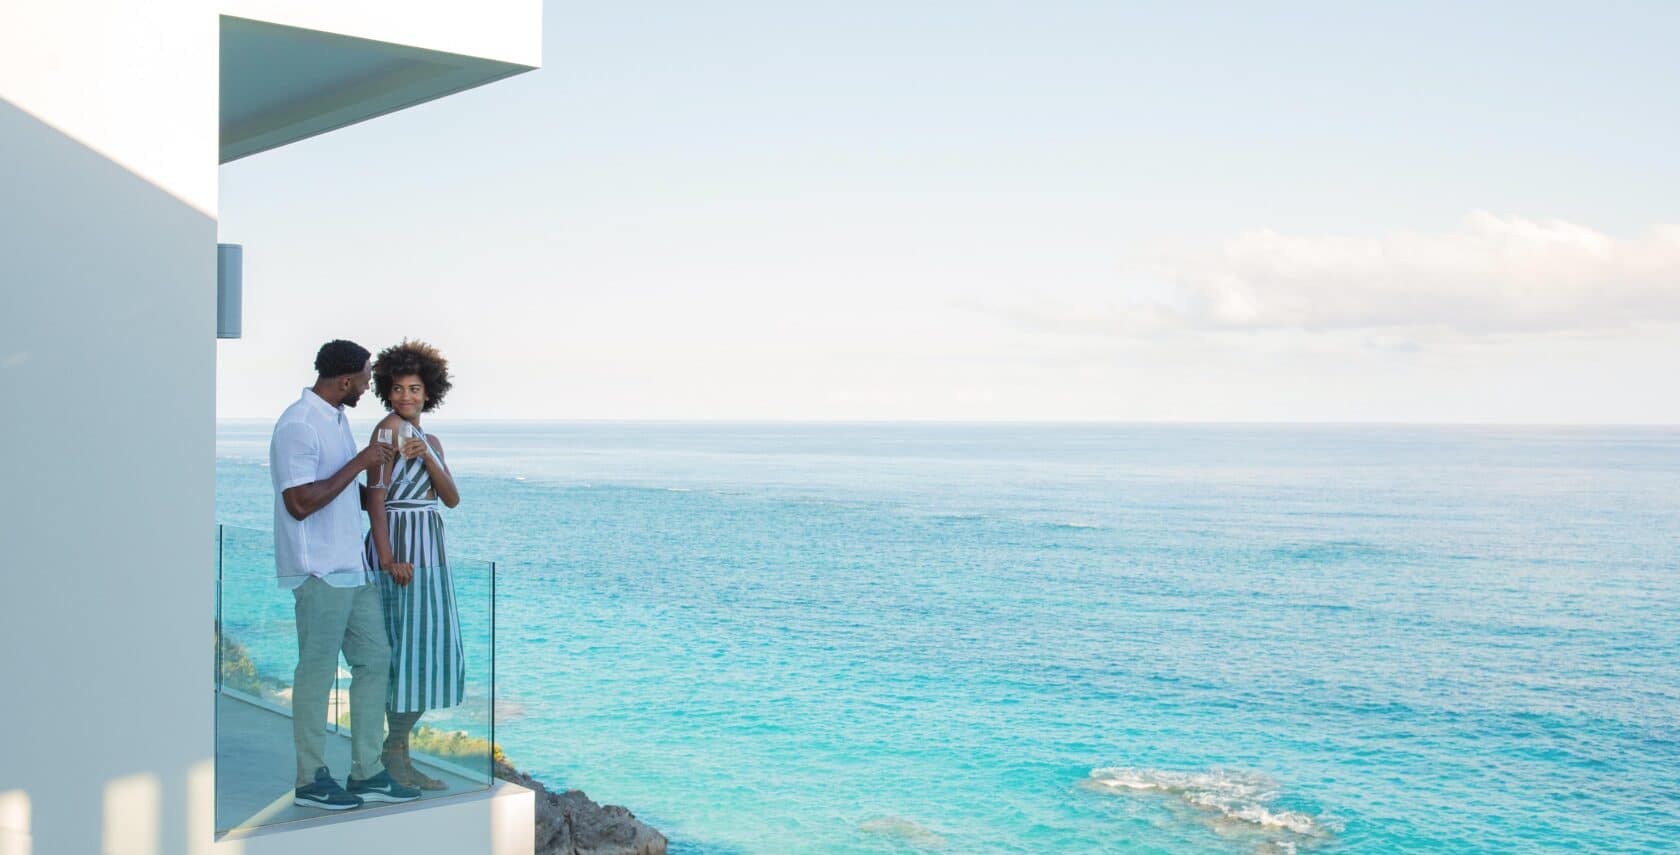 A couple on a balcony overlooking the ocean.